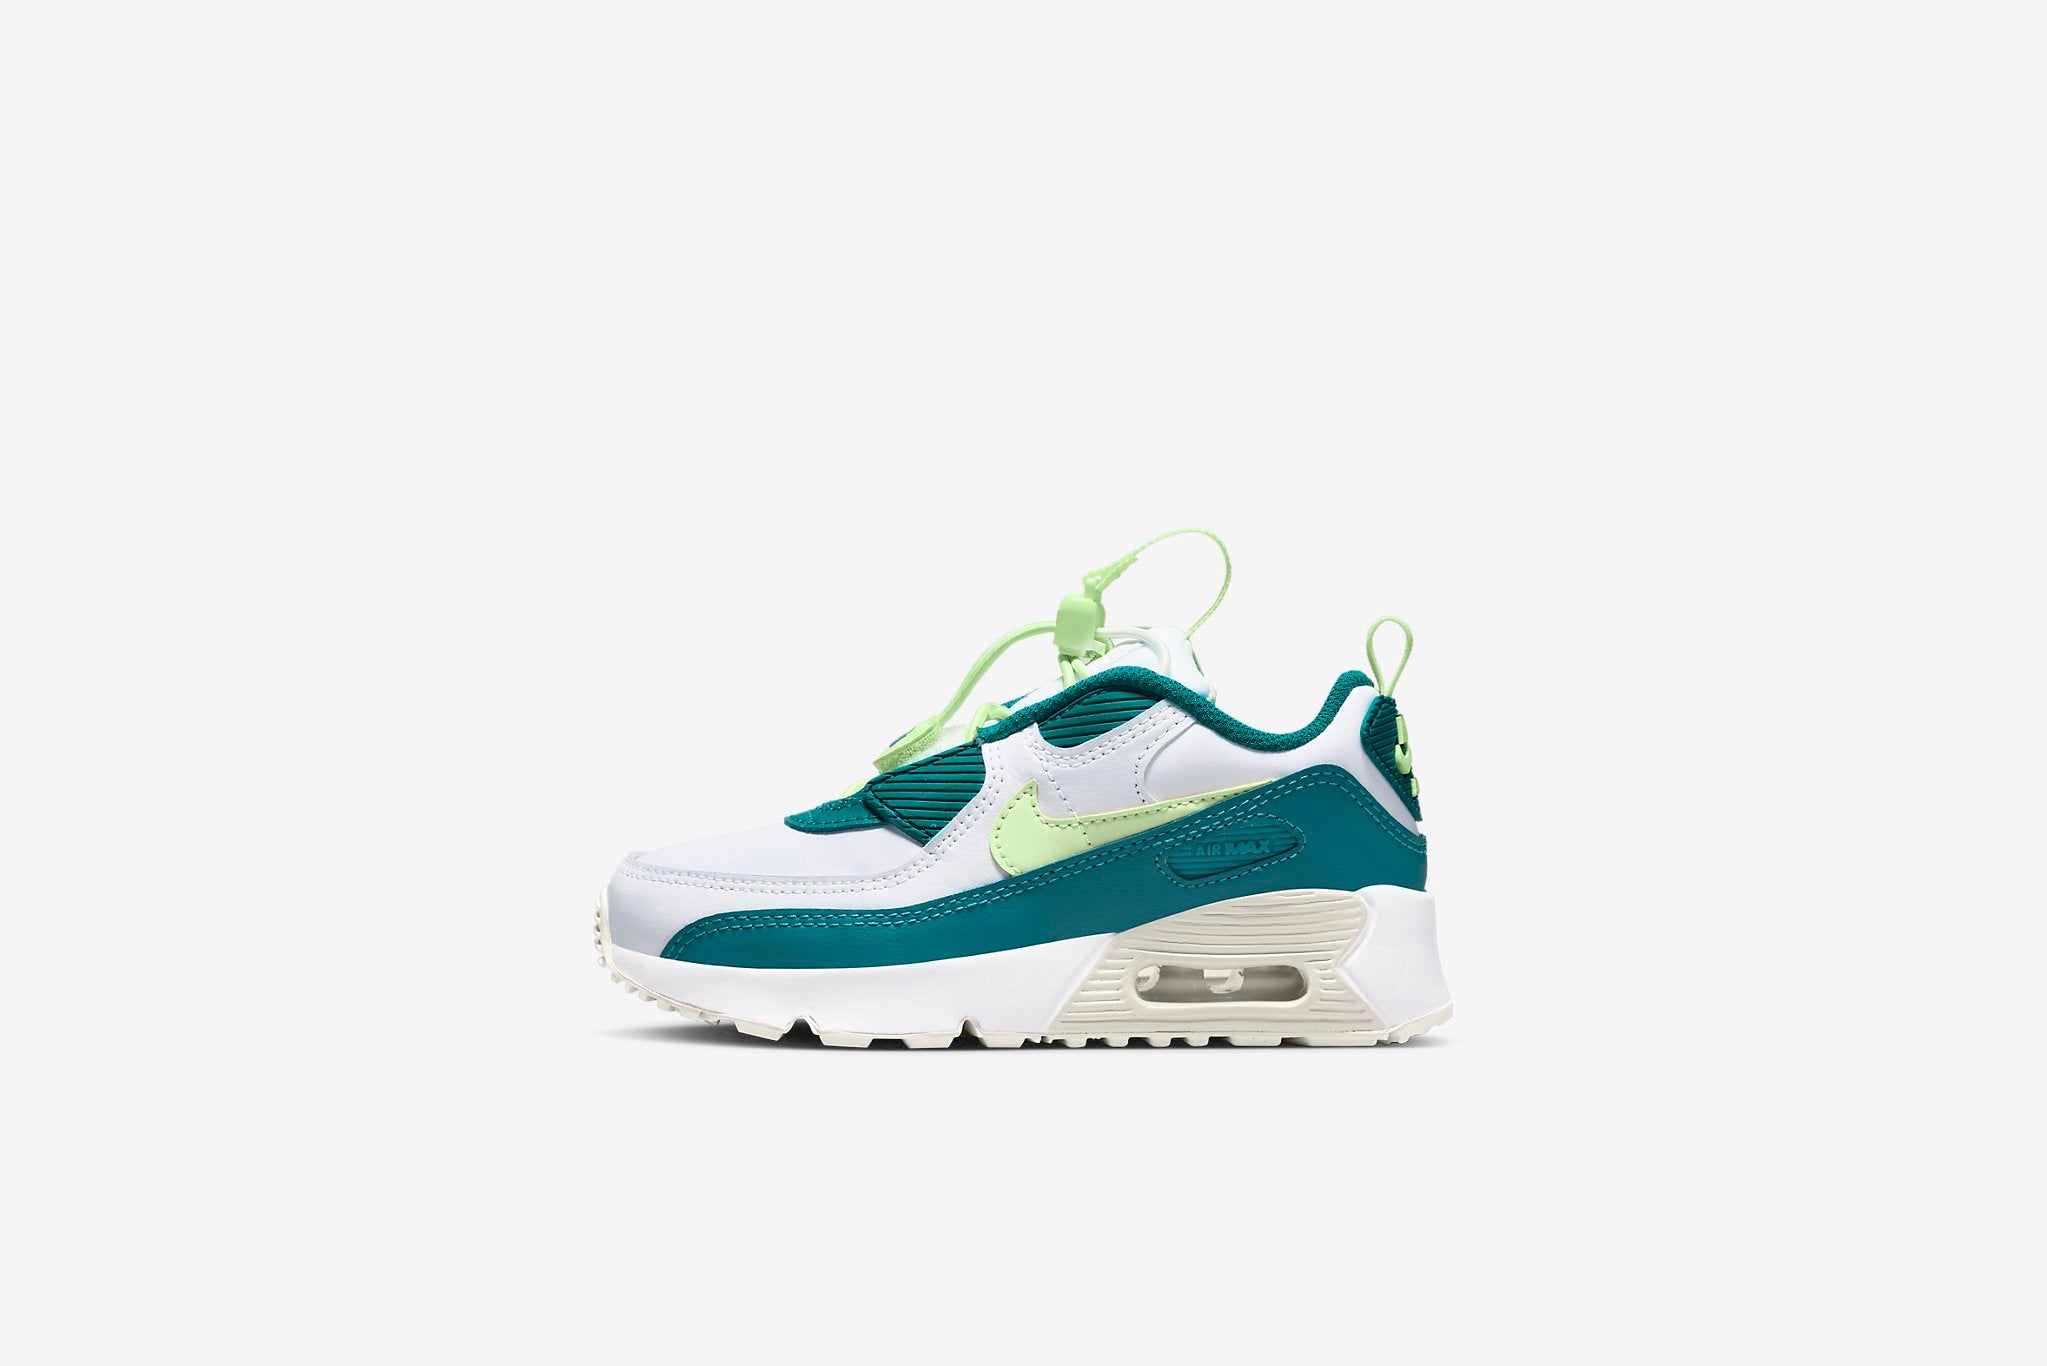 Nike "Air Max 90 Toggle" PS - White / Barely Volt –